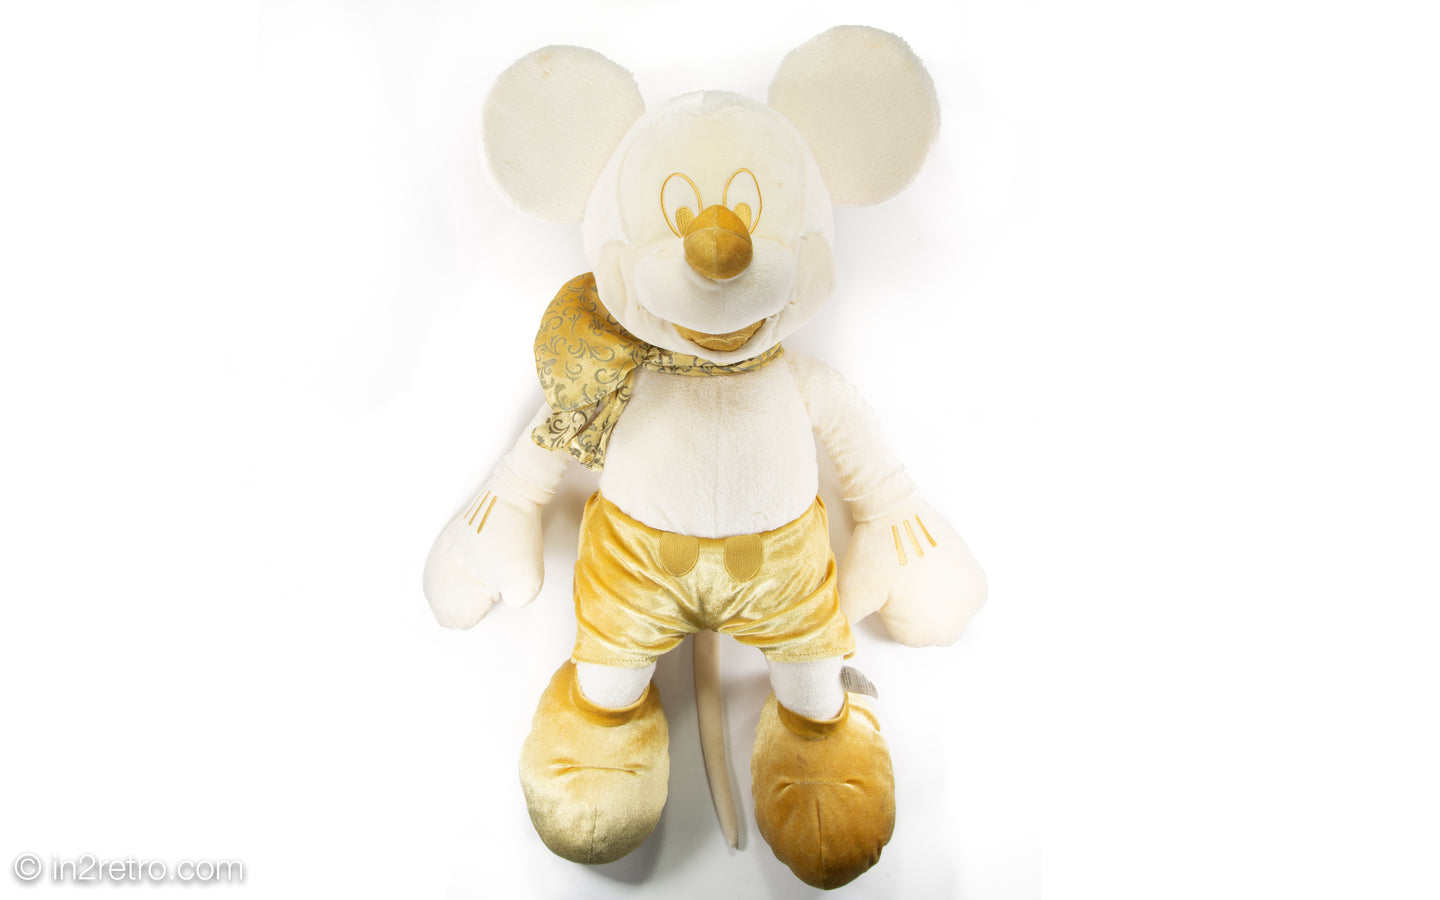 RARE DISNEY STORE EXCLUSIVE LARGE GOLD AND CREAM MICKEY MOUSE PLUSH TOY